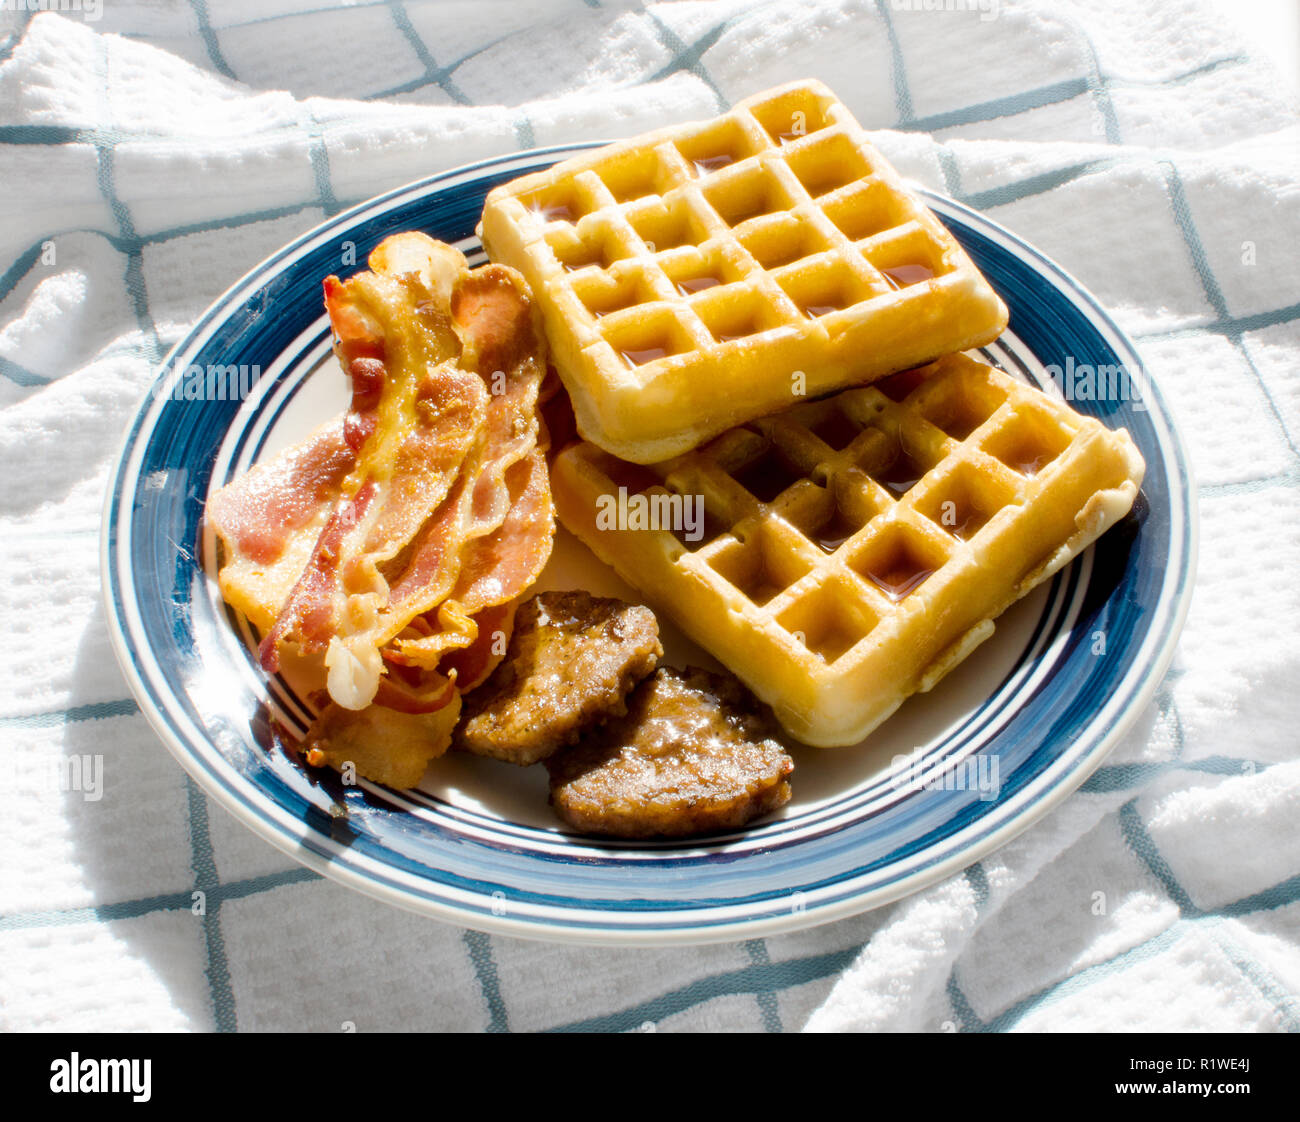 Plate of waffles with maple syrup, bacon and sausage patties Stock Photo